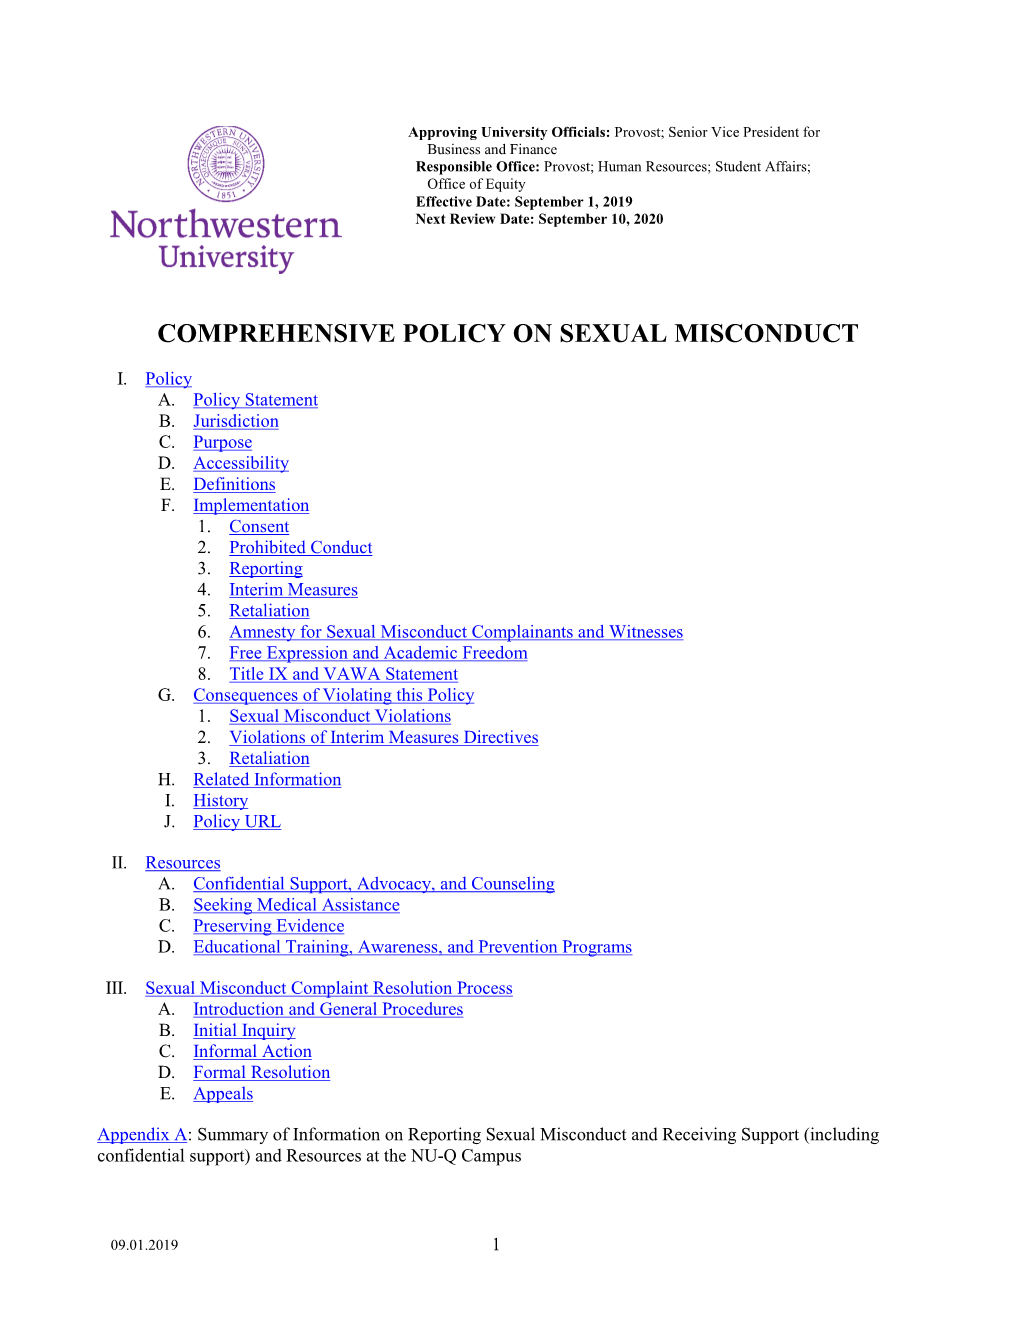 Comprehensive Policy on Sexual Misconduct